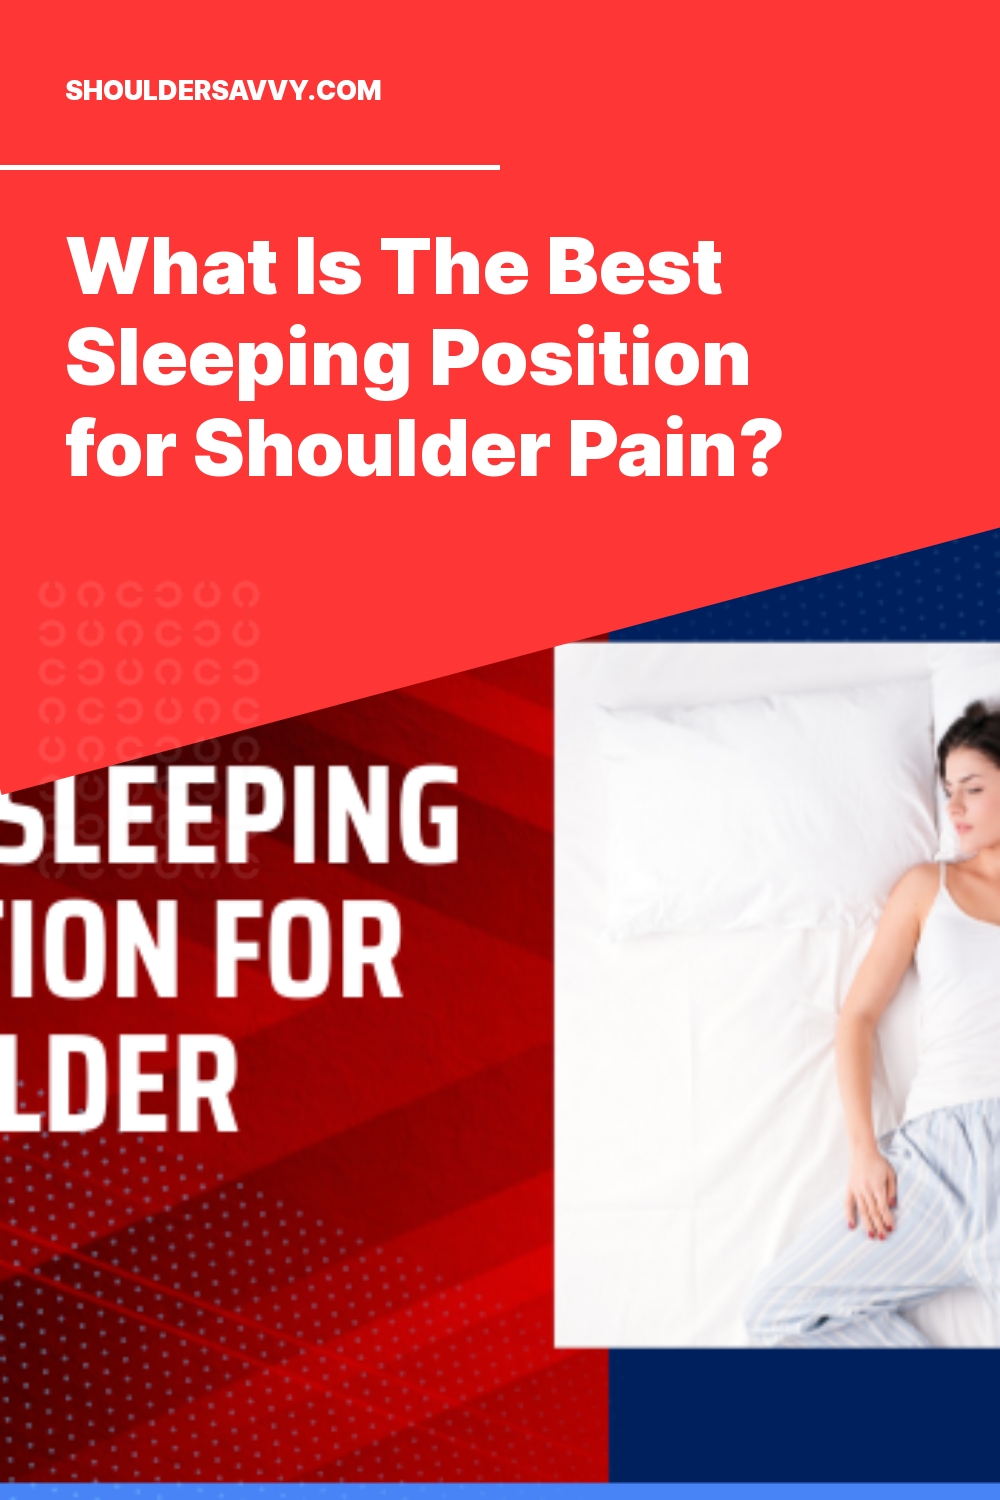 What Is The Best Sleeping Position for Shoulder Pain?